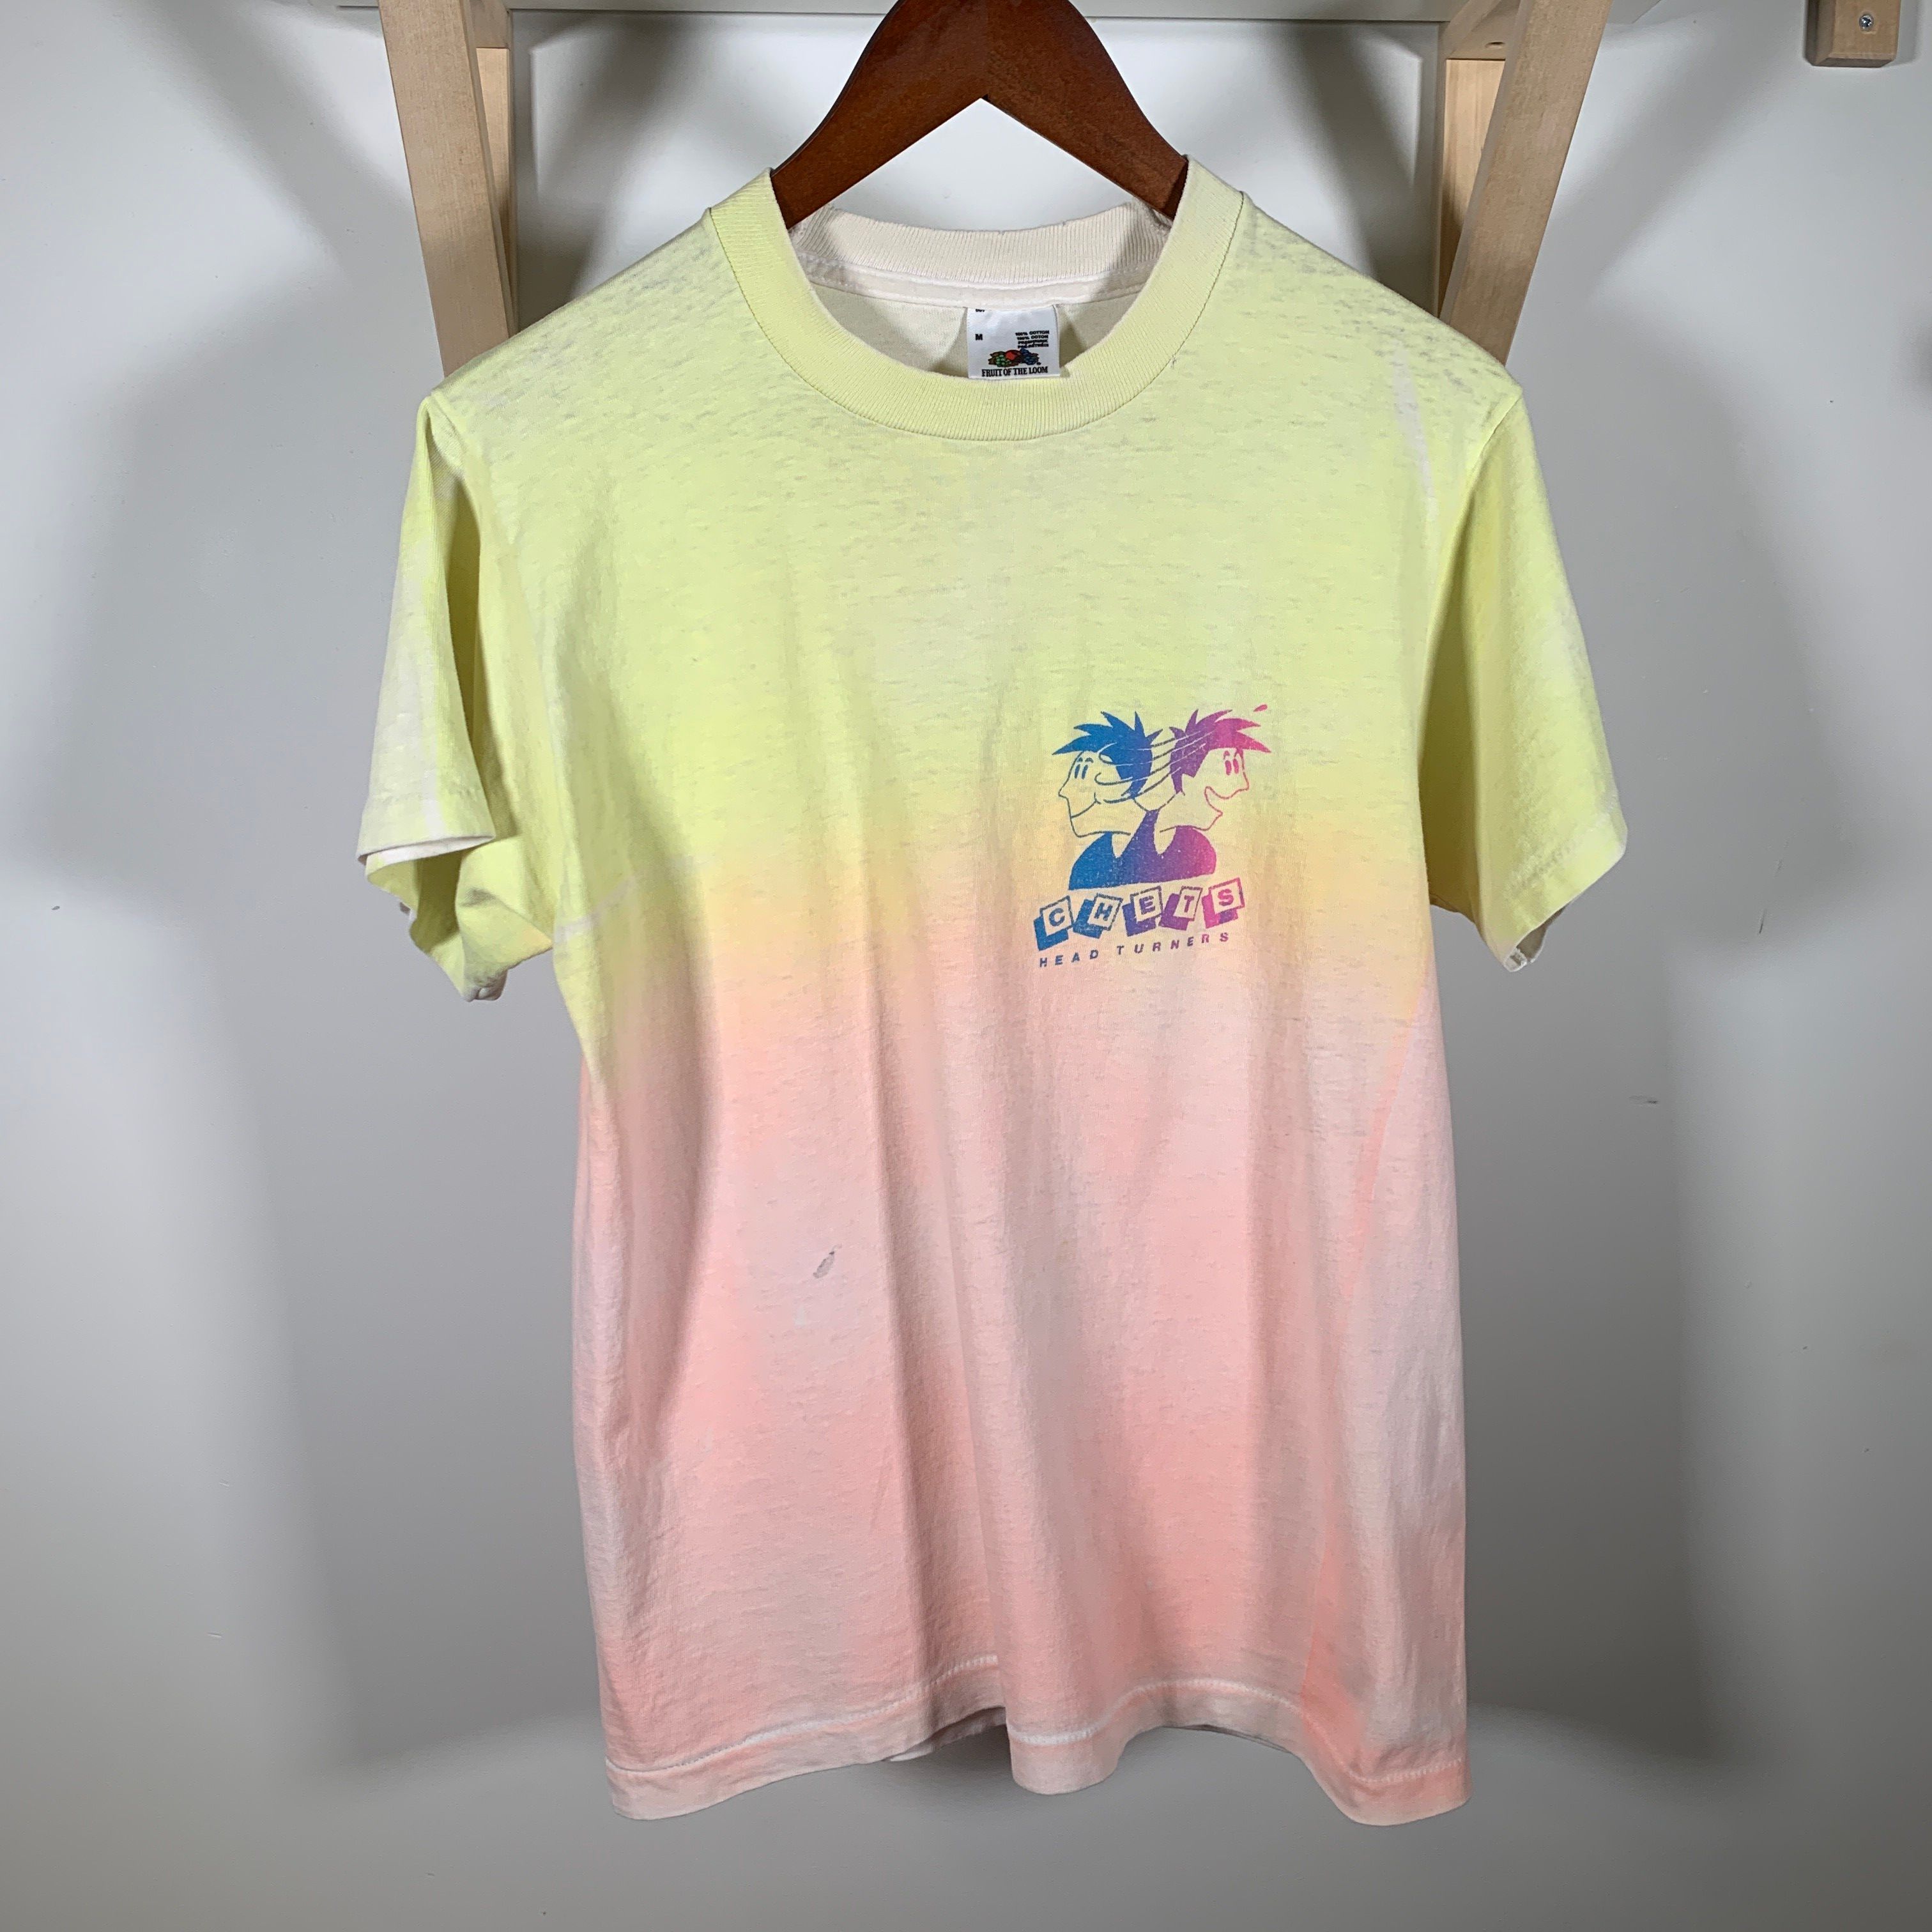 Pre-owned Hype X Vintage 90's Chets Headturners Neon Ombre Faded Shirt Travis Style In Neon Pink Yellow